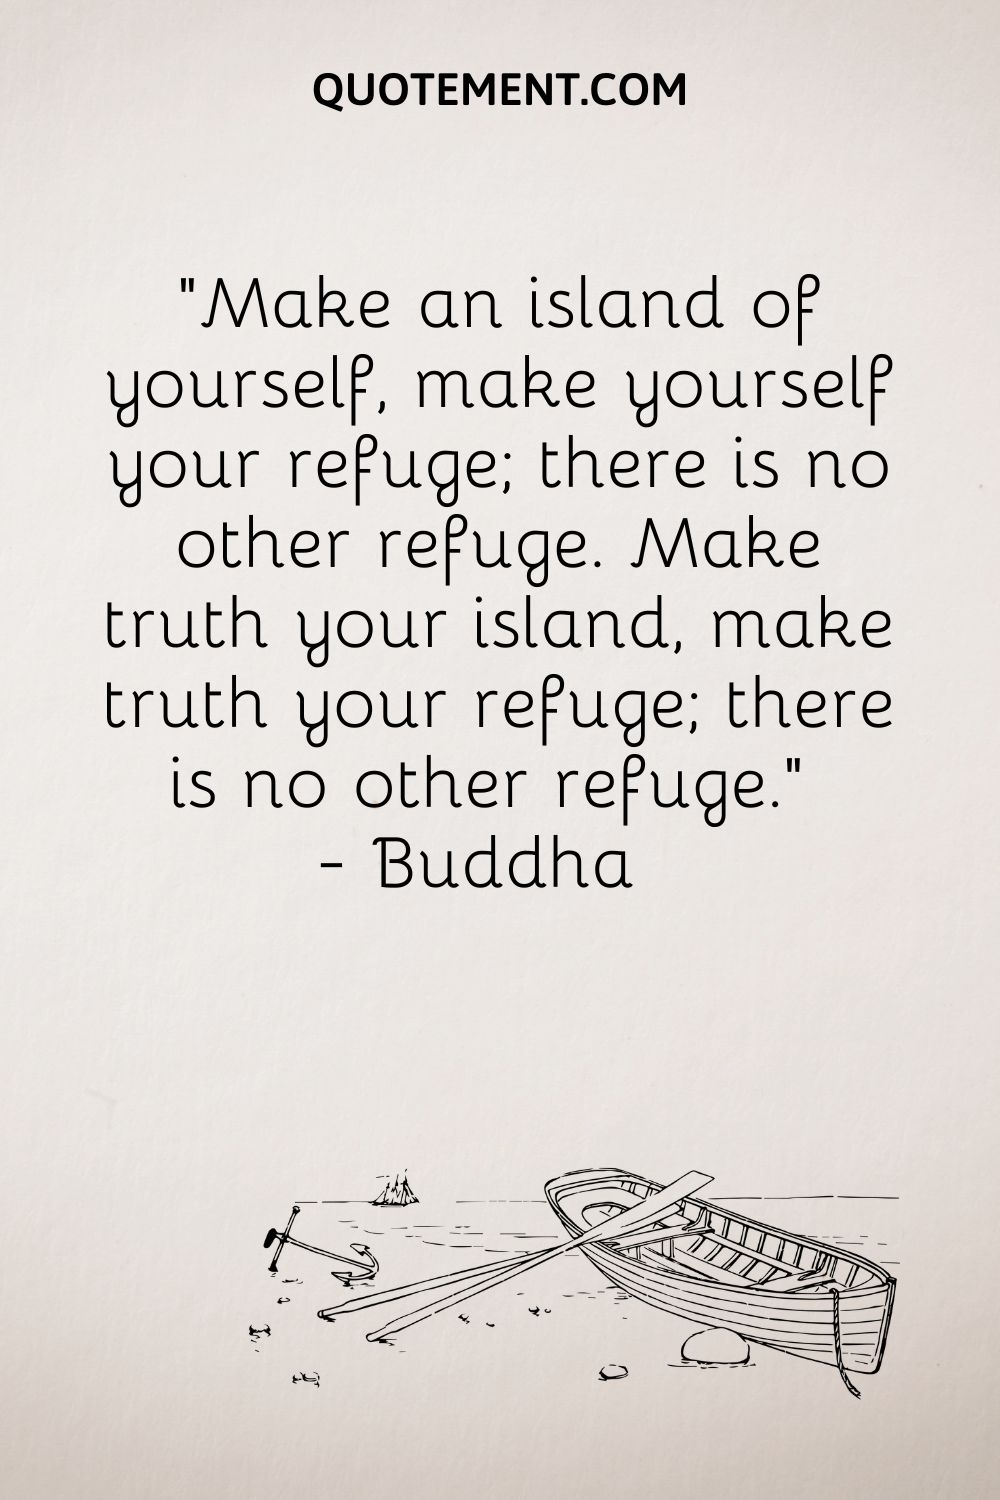 Make an island of yourself, make yourself your refuge; there is no other refuge. Make truth your island, make truth your refuge; there is no other refuge. — Buddha